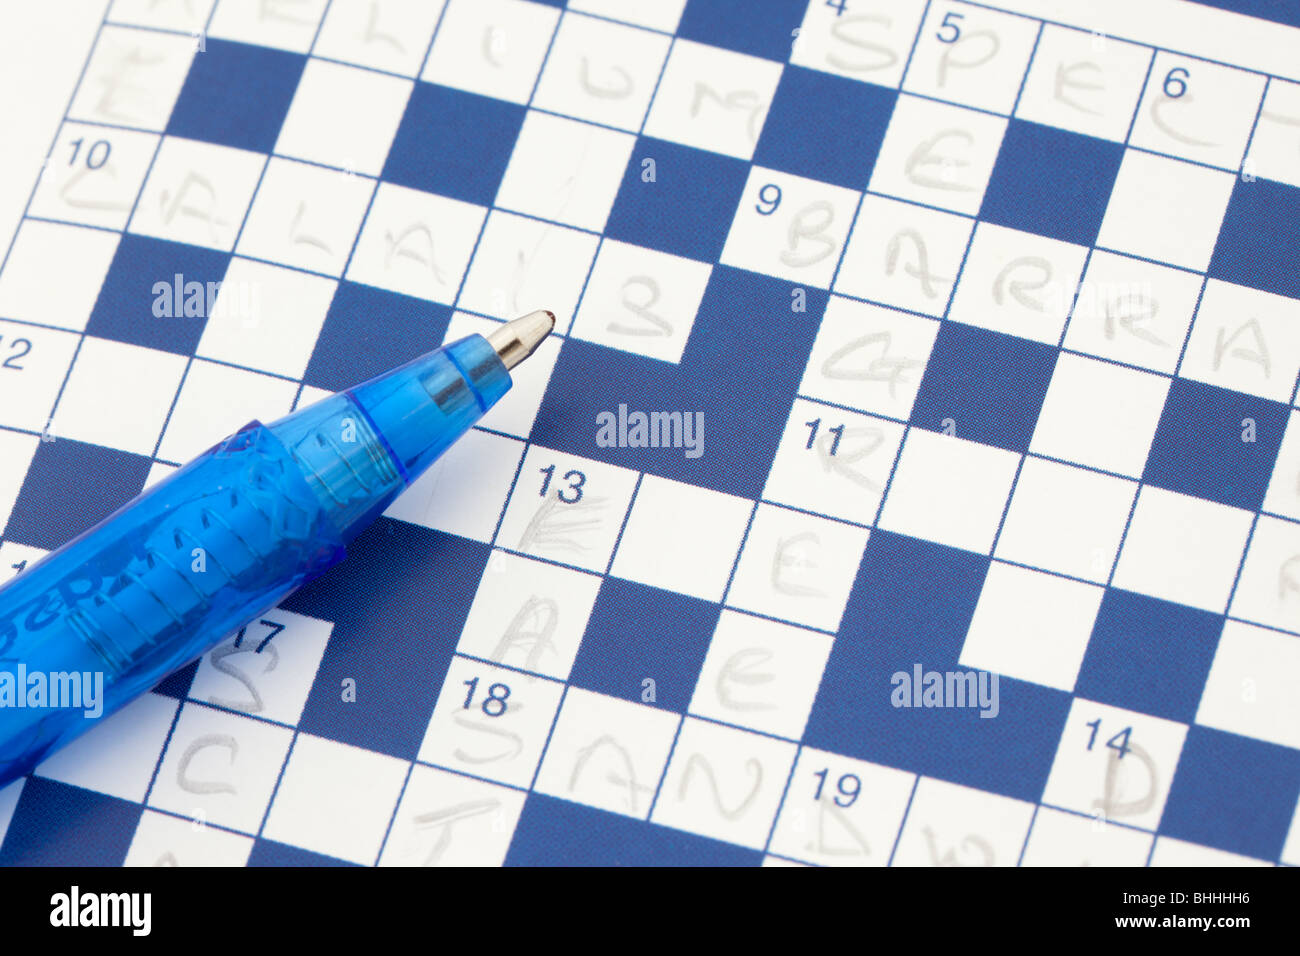 Studio still life UK Europe. Close-up of an incomplete blue and white paper crossword puzzle with a blue ballpoint pen Stock Photo